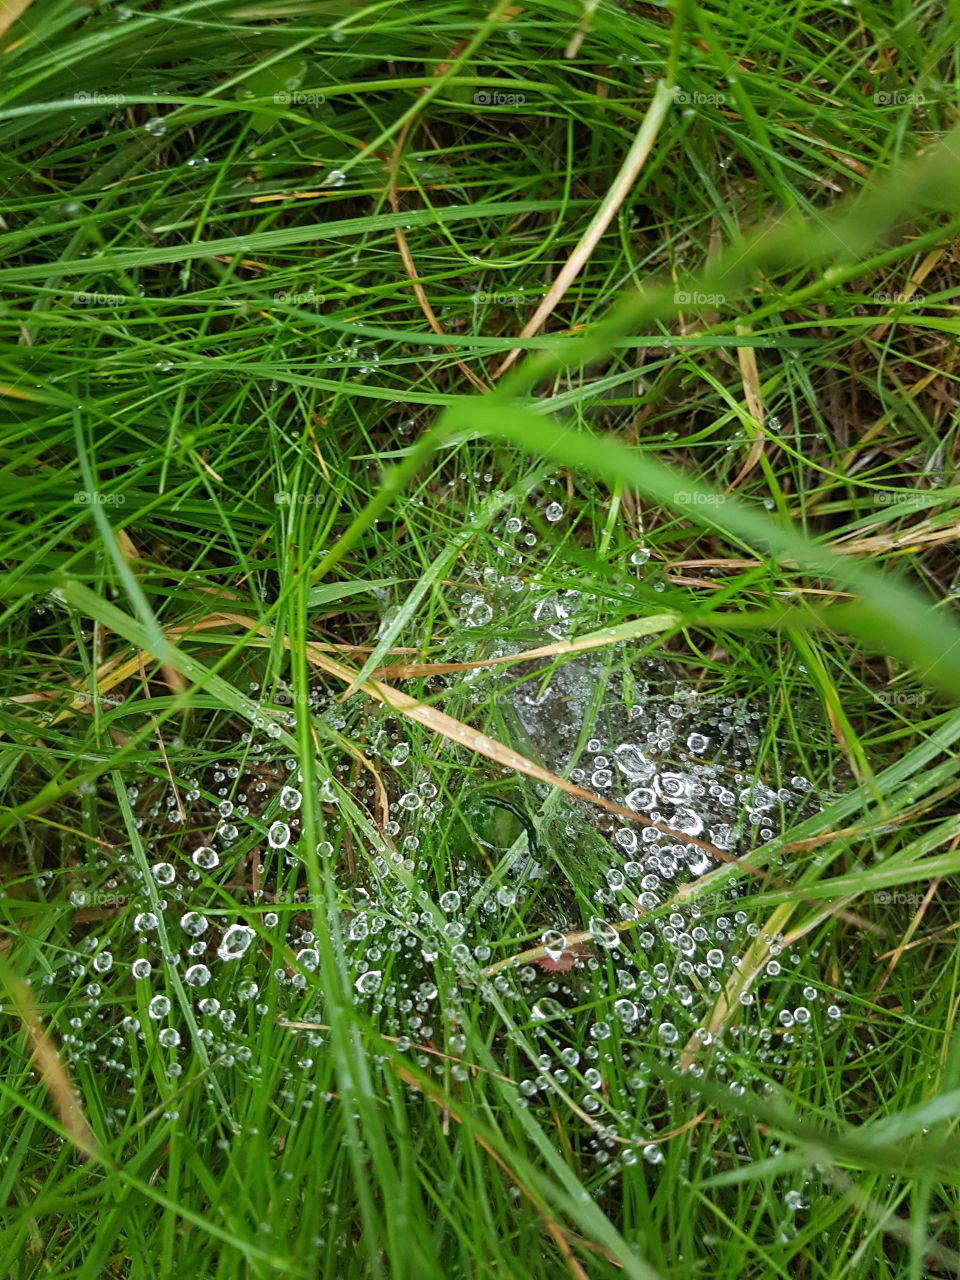 cobwebs in the rain and grass